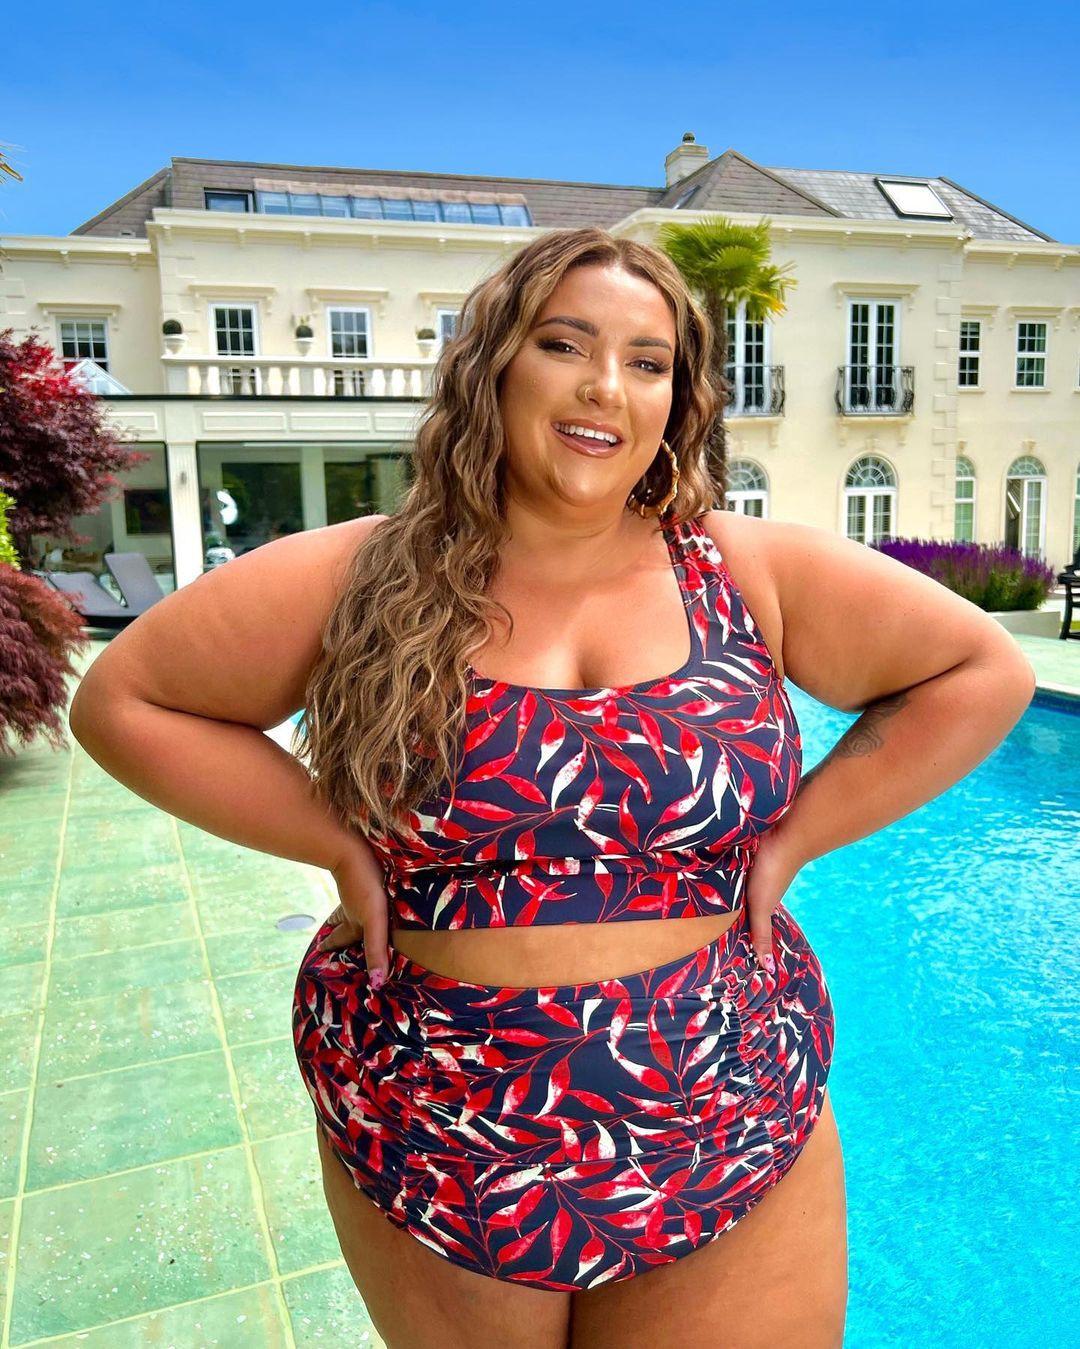 Plus-size influencers, fat pool parties and summer body confidence